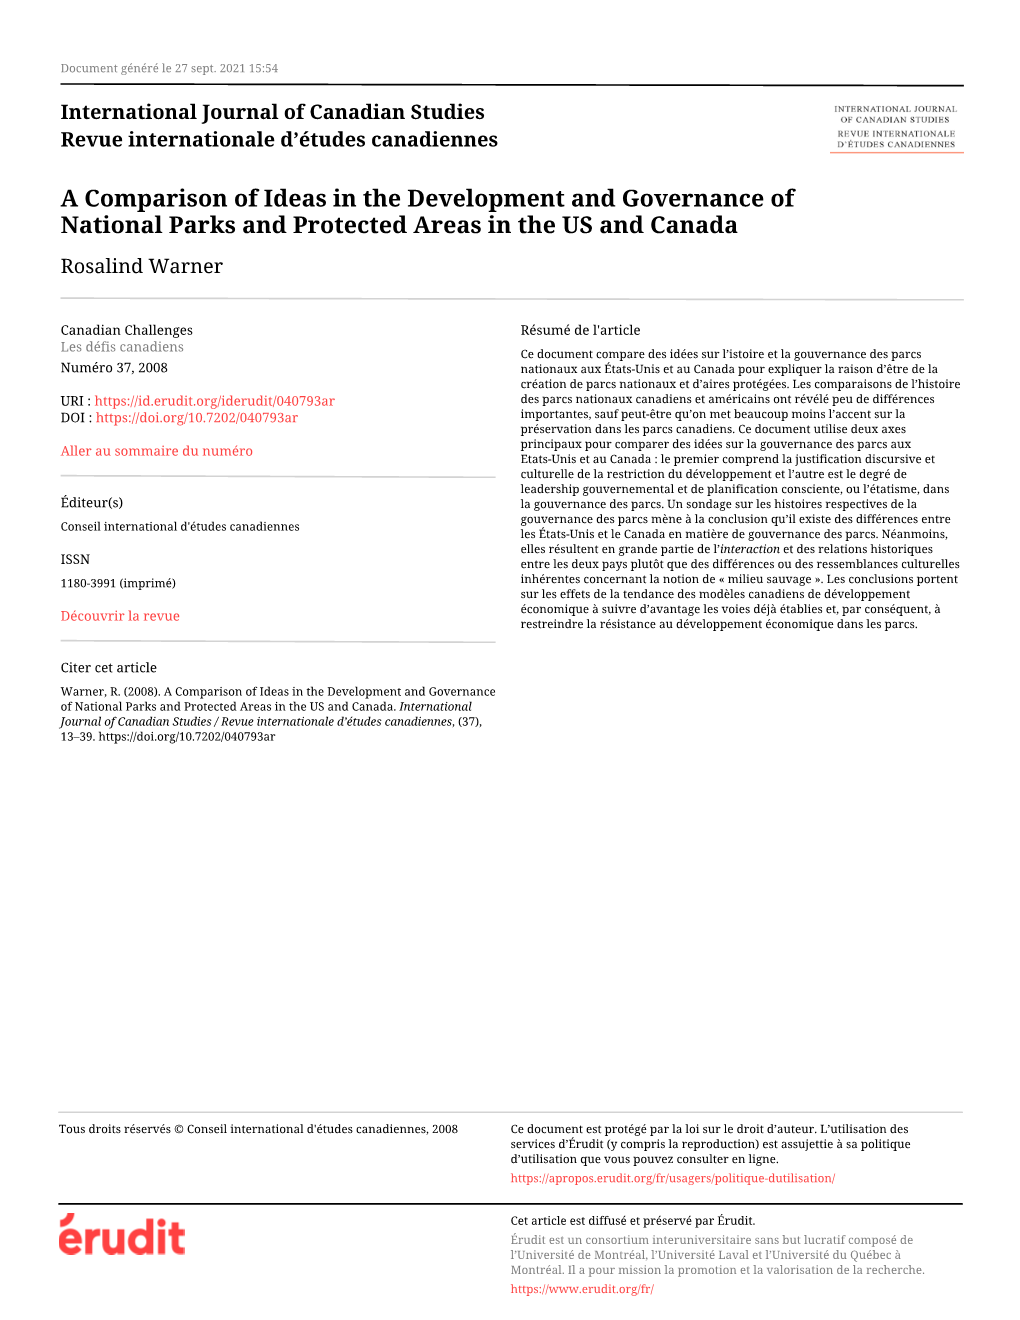 A Comparison of Ideas in the Development and Governance of National Parks and Protected Areas in the US and Canada Rosalind Warner